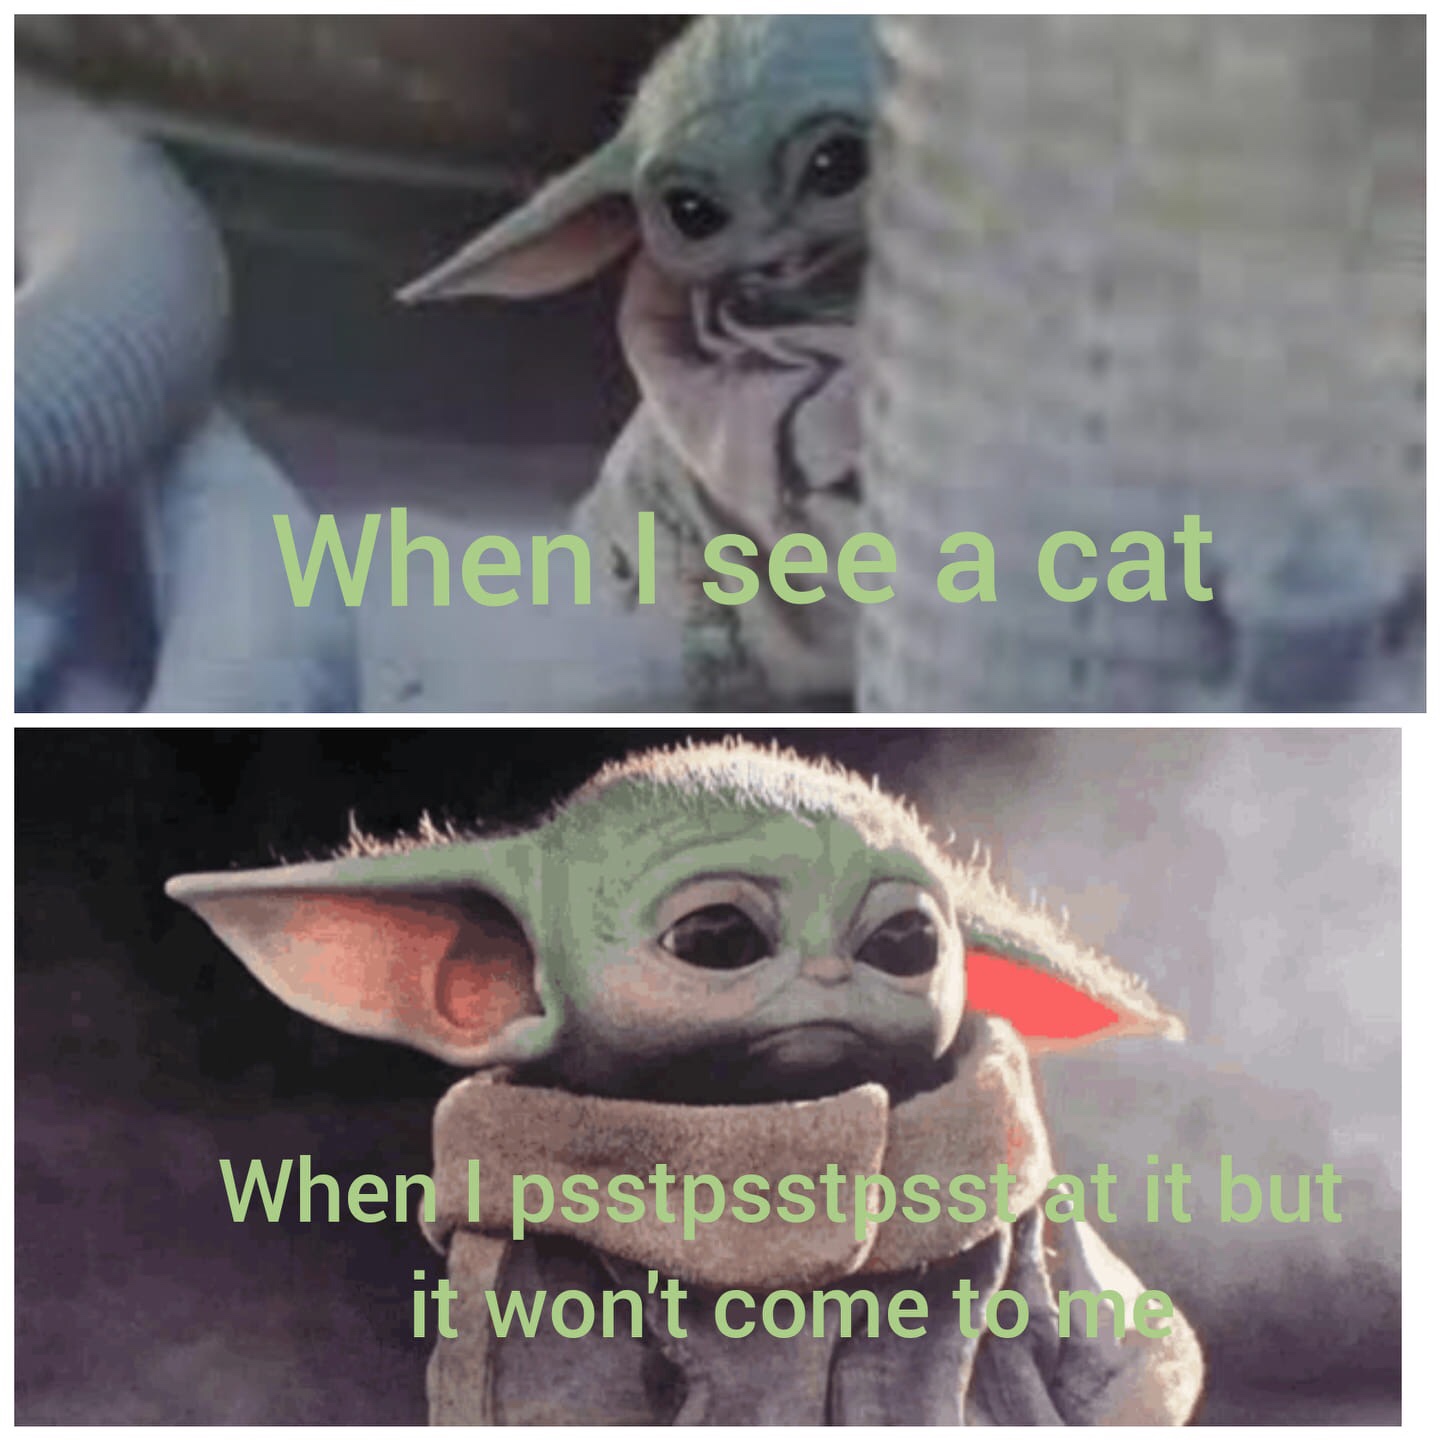 photo caption - When I see a cat When I psstpsstpsset it but it won't come to ma